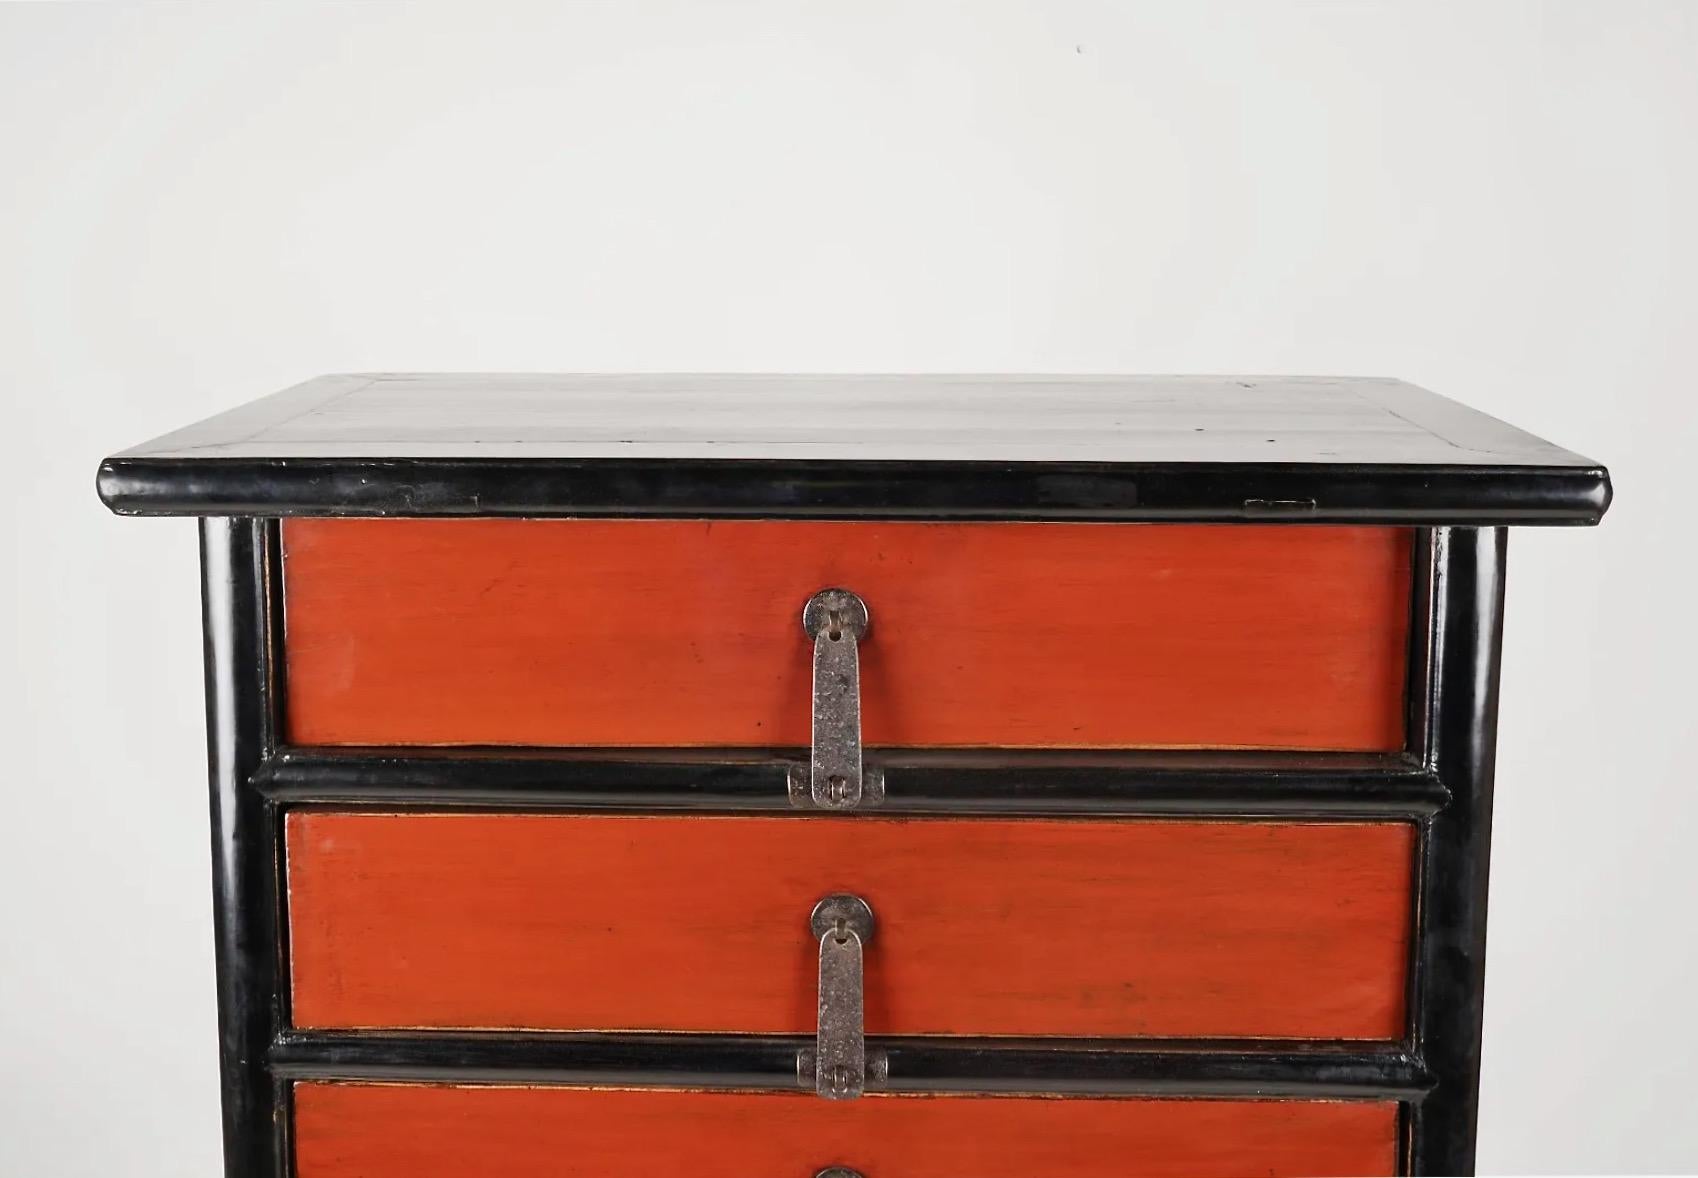 This is a beautifully designed and fabricated Japanese pagoda-shaped tall chest of drawers. The chest dates to the late 20th or early 21st century and is in very good to excellent overall condition. 
Japanese lacquer is a centuries old art form